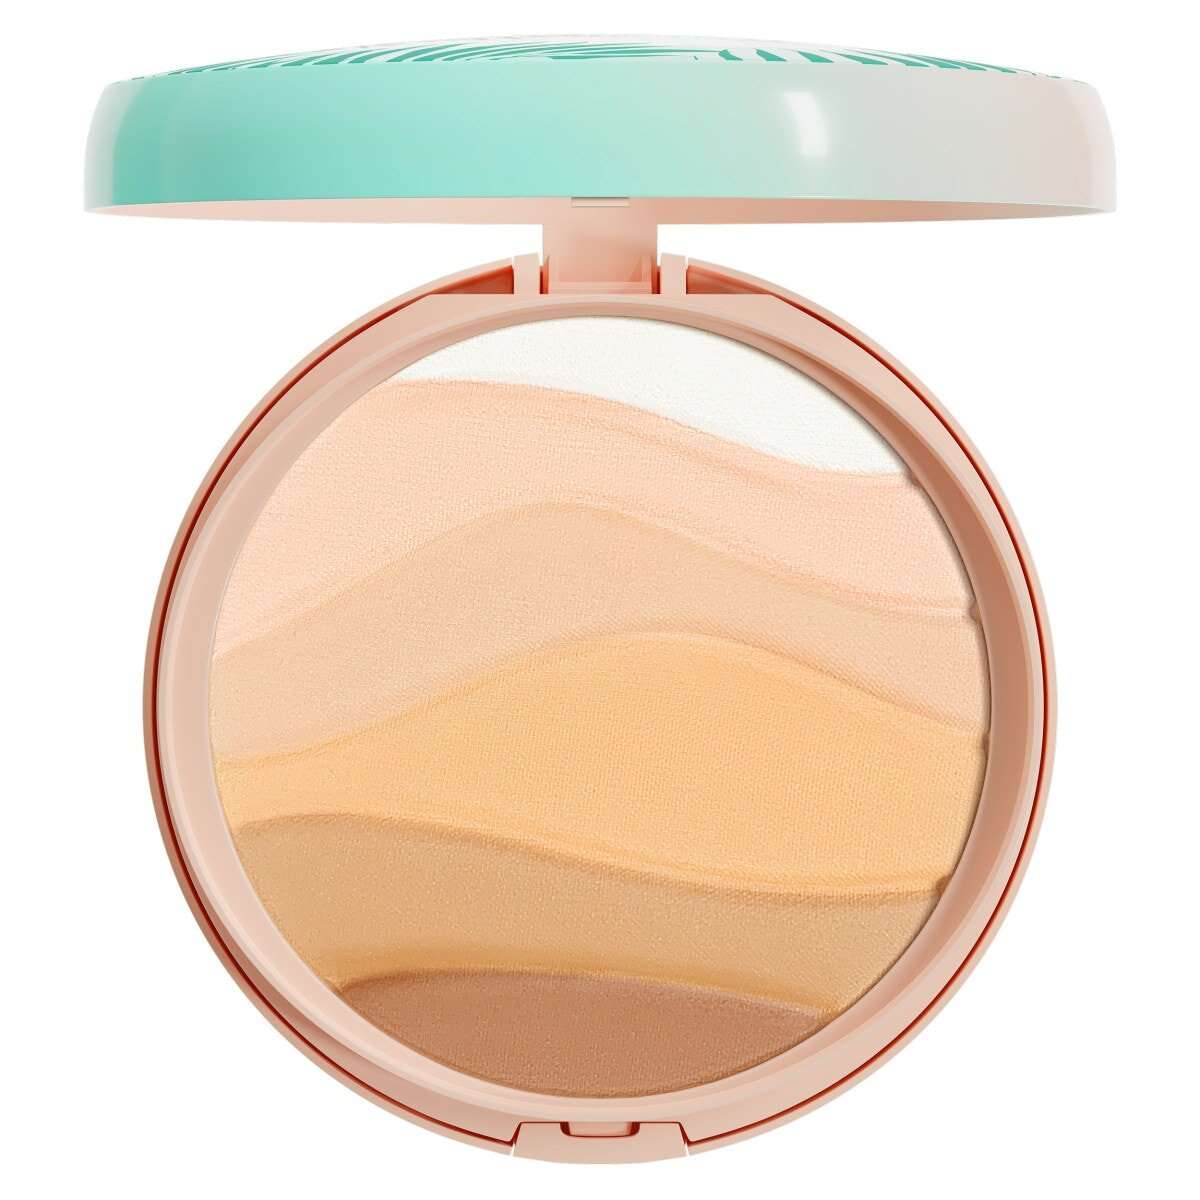 BUTTER BELIEVE IT POLVO COMPACTO - PHYSICIANS FORMULA